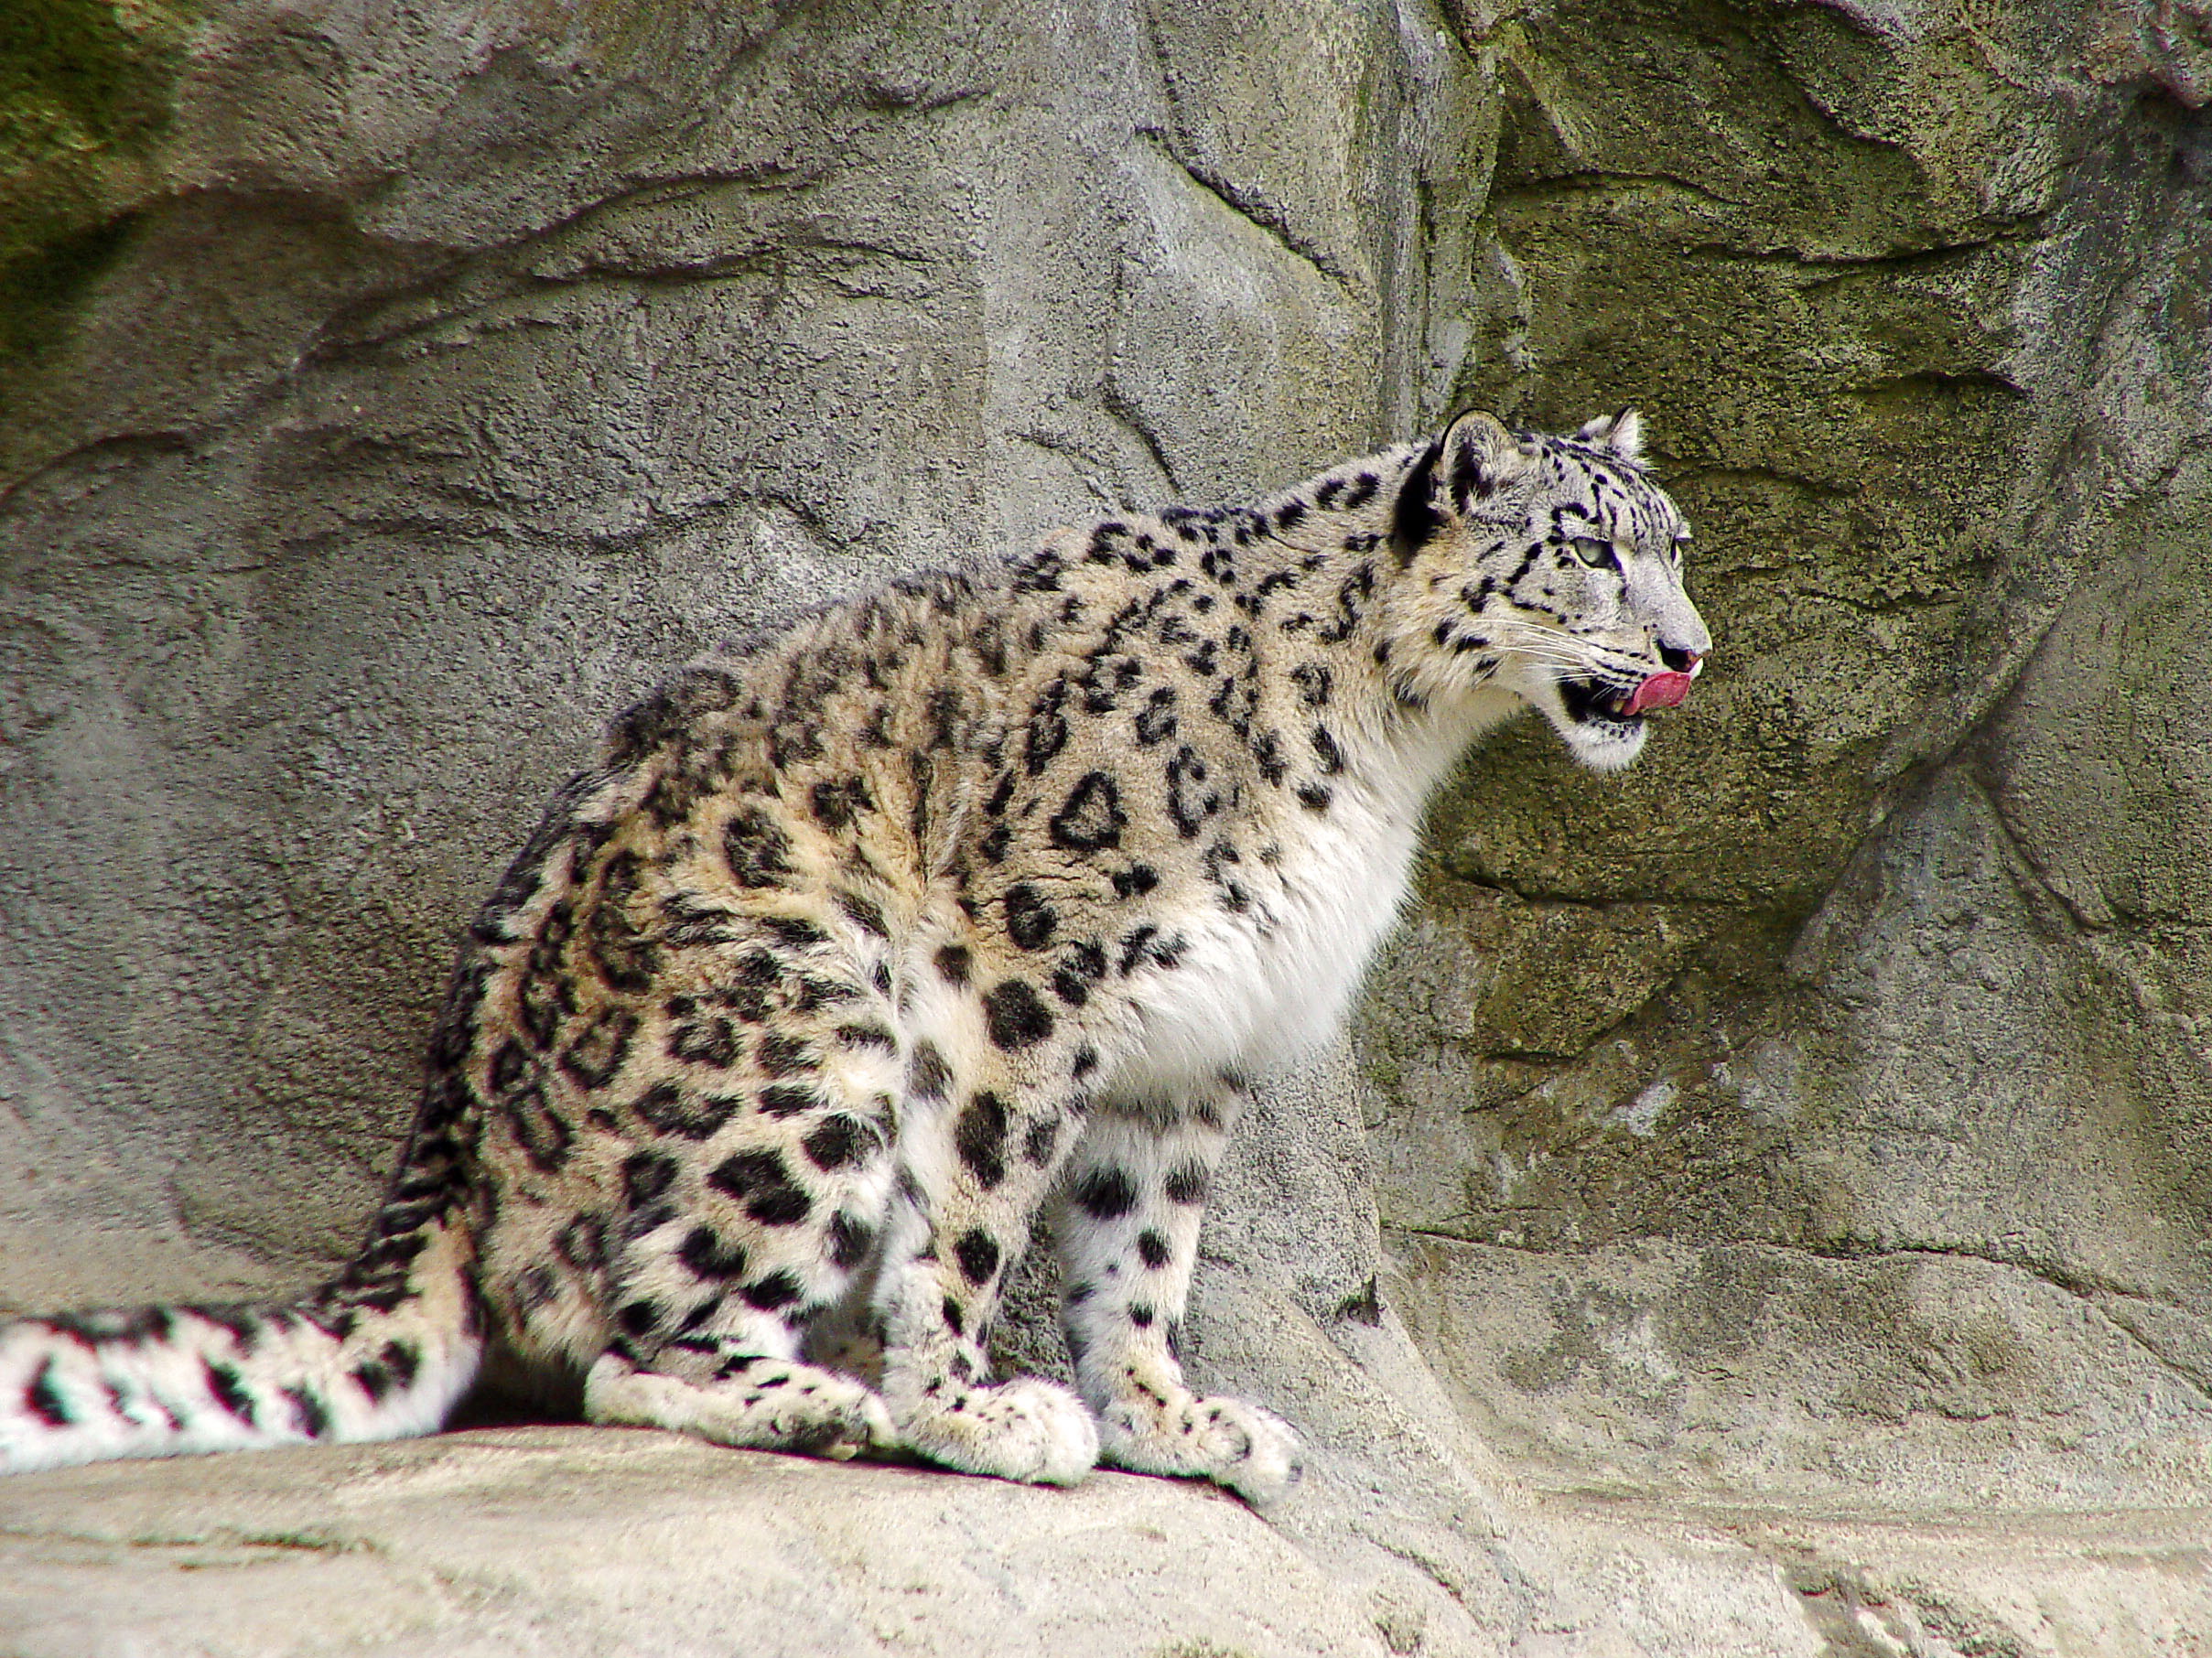 Snow Leopard at the Zurich Zoo